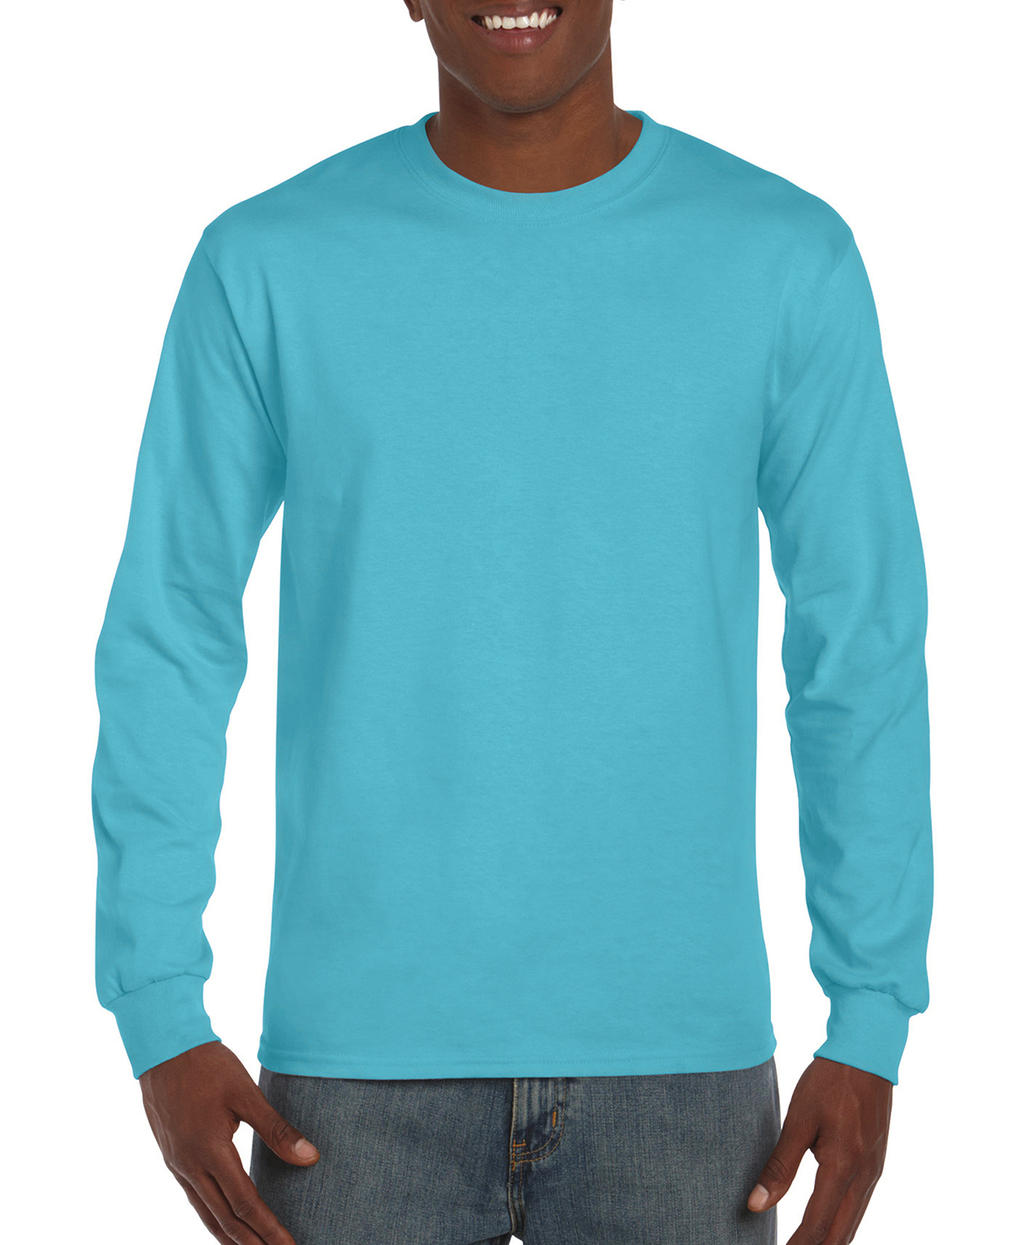  Hammer? Adult Long Sleeve T-Shirt in Farbe Lagoon Blue